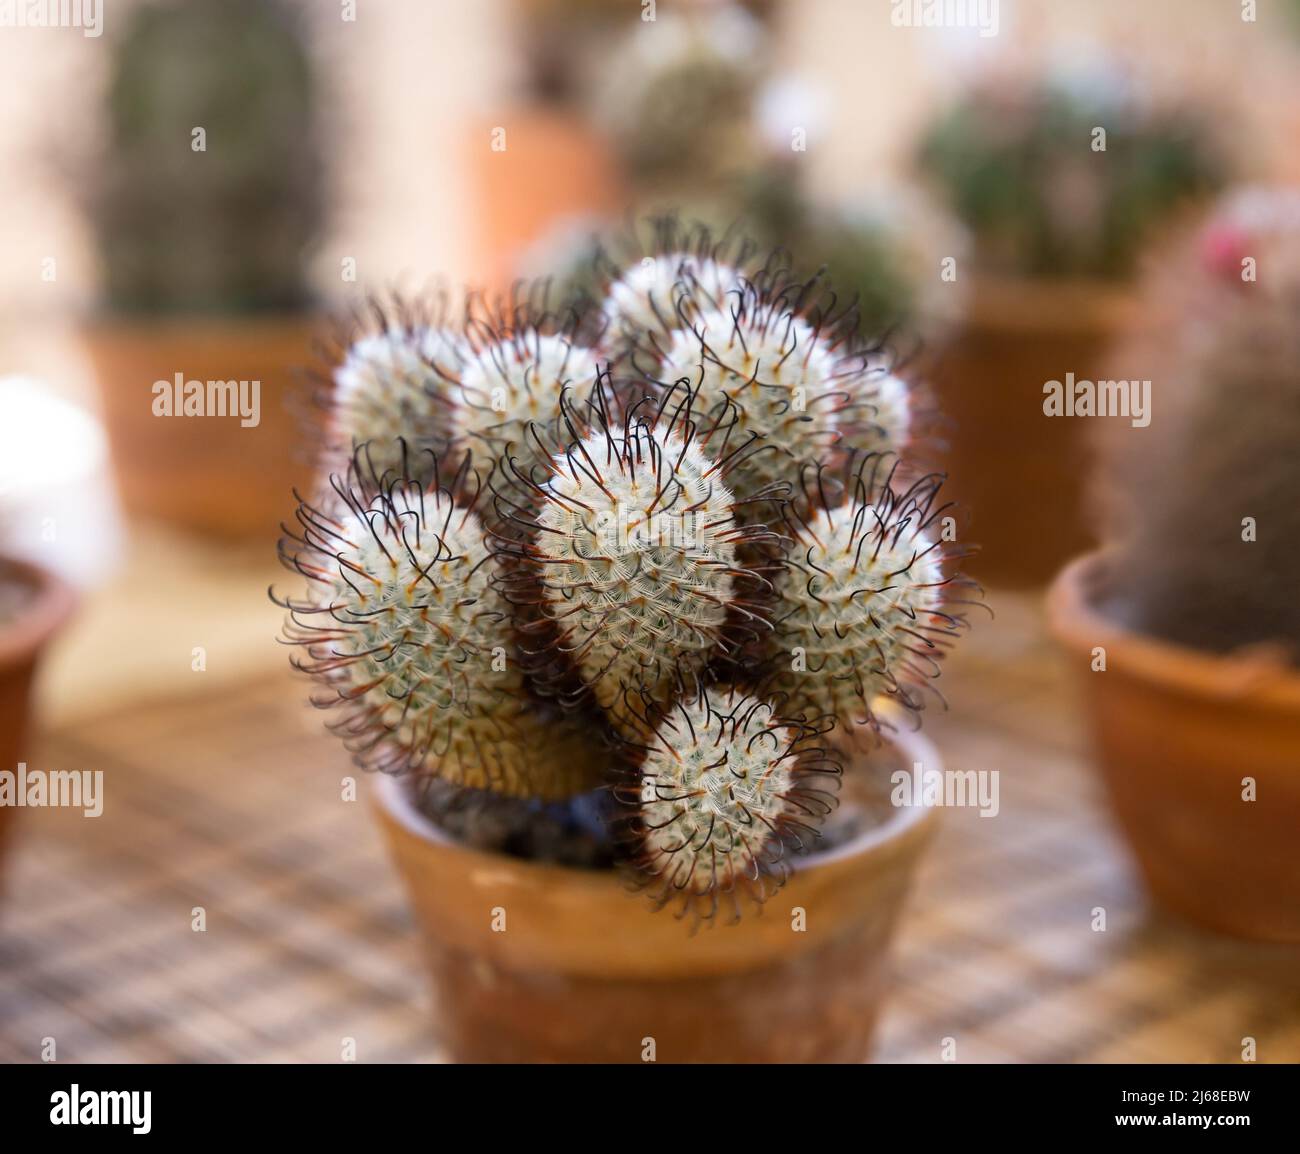 Cactus Mammillaria perezdelarosae in a ceramic flower pot. White fluffy cactus with long dark curved spines Stock Photo